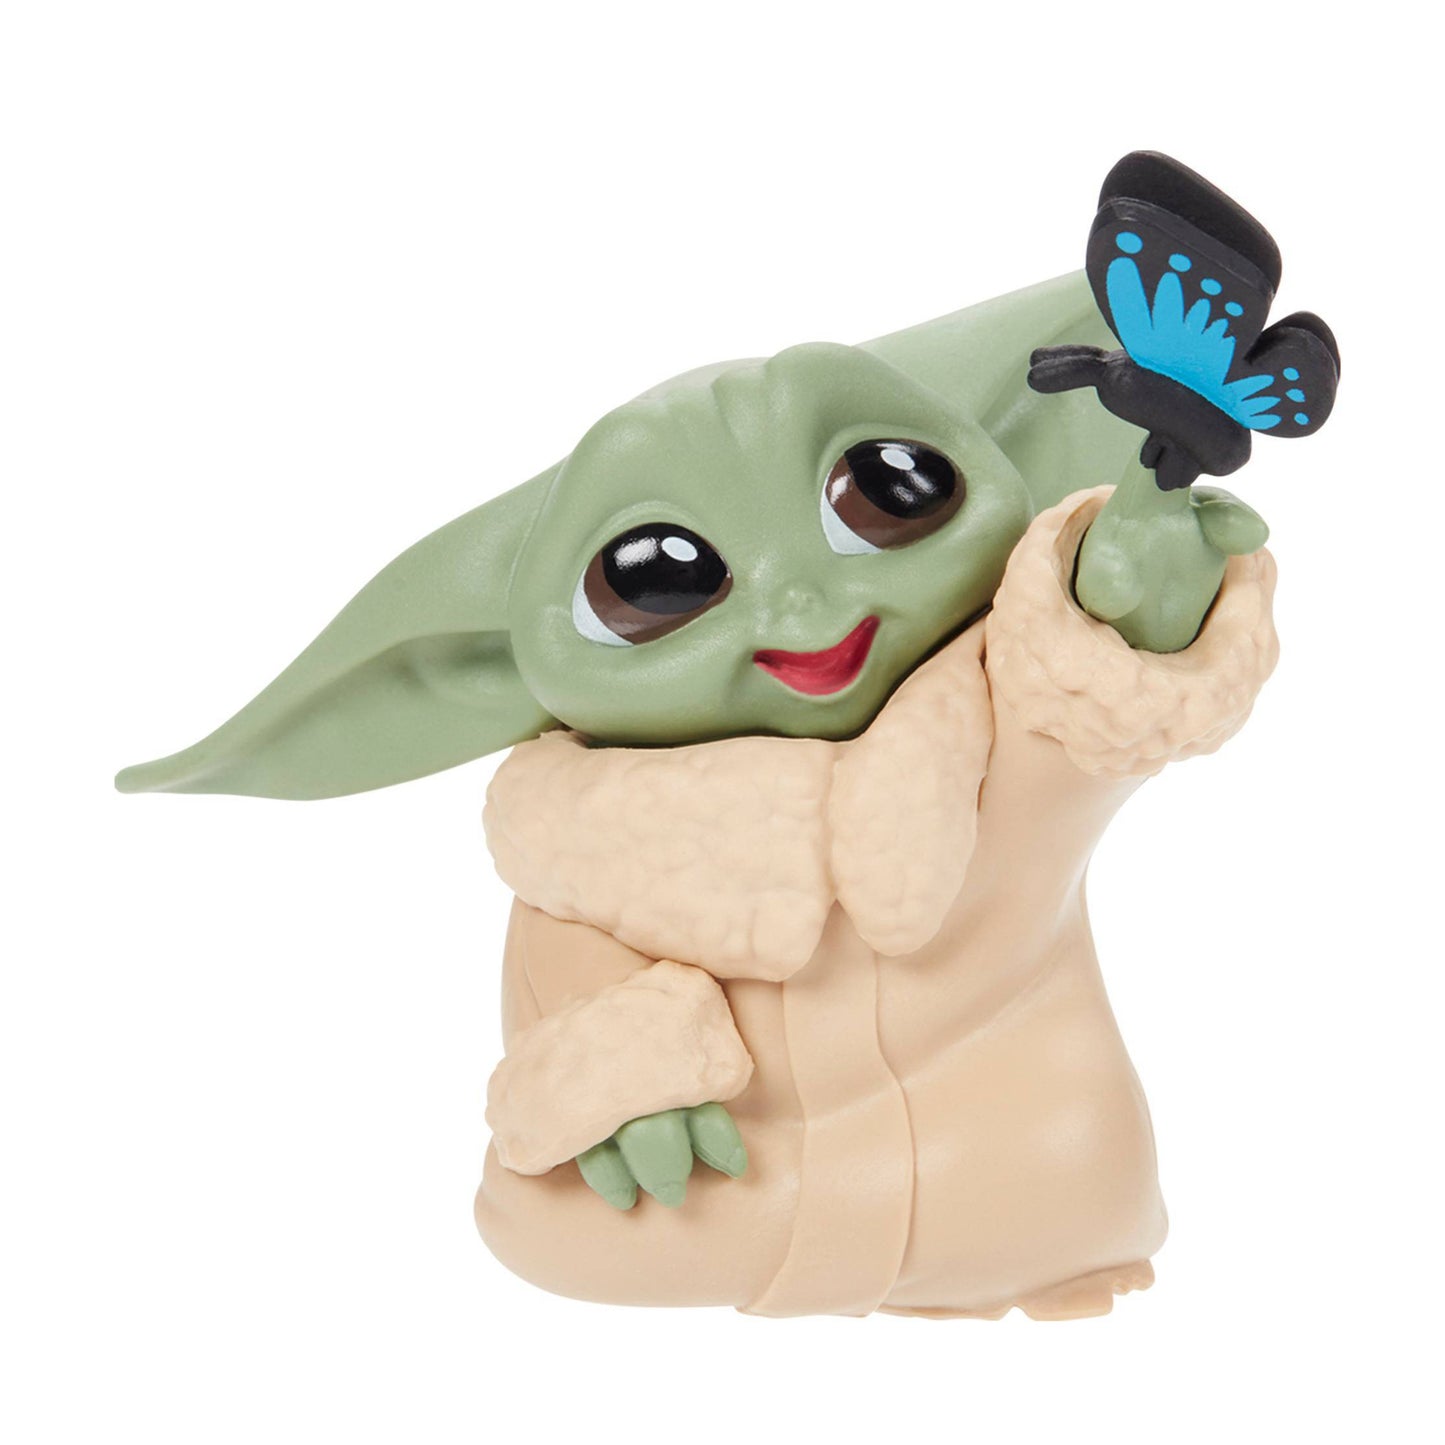 Star Wars: The Bounty Collection: Series 4: The Child Baby Yoda Cute Butterfly Encounter